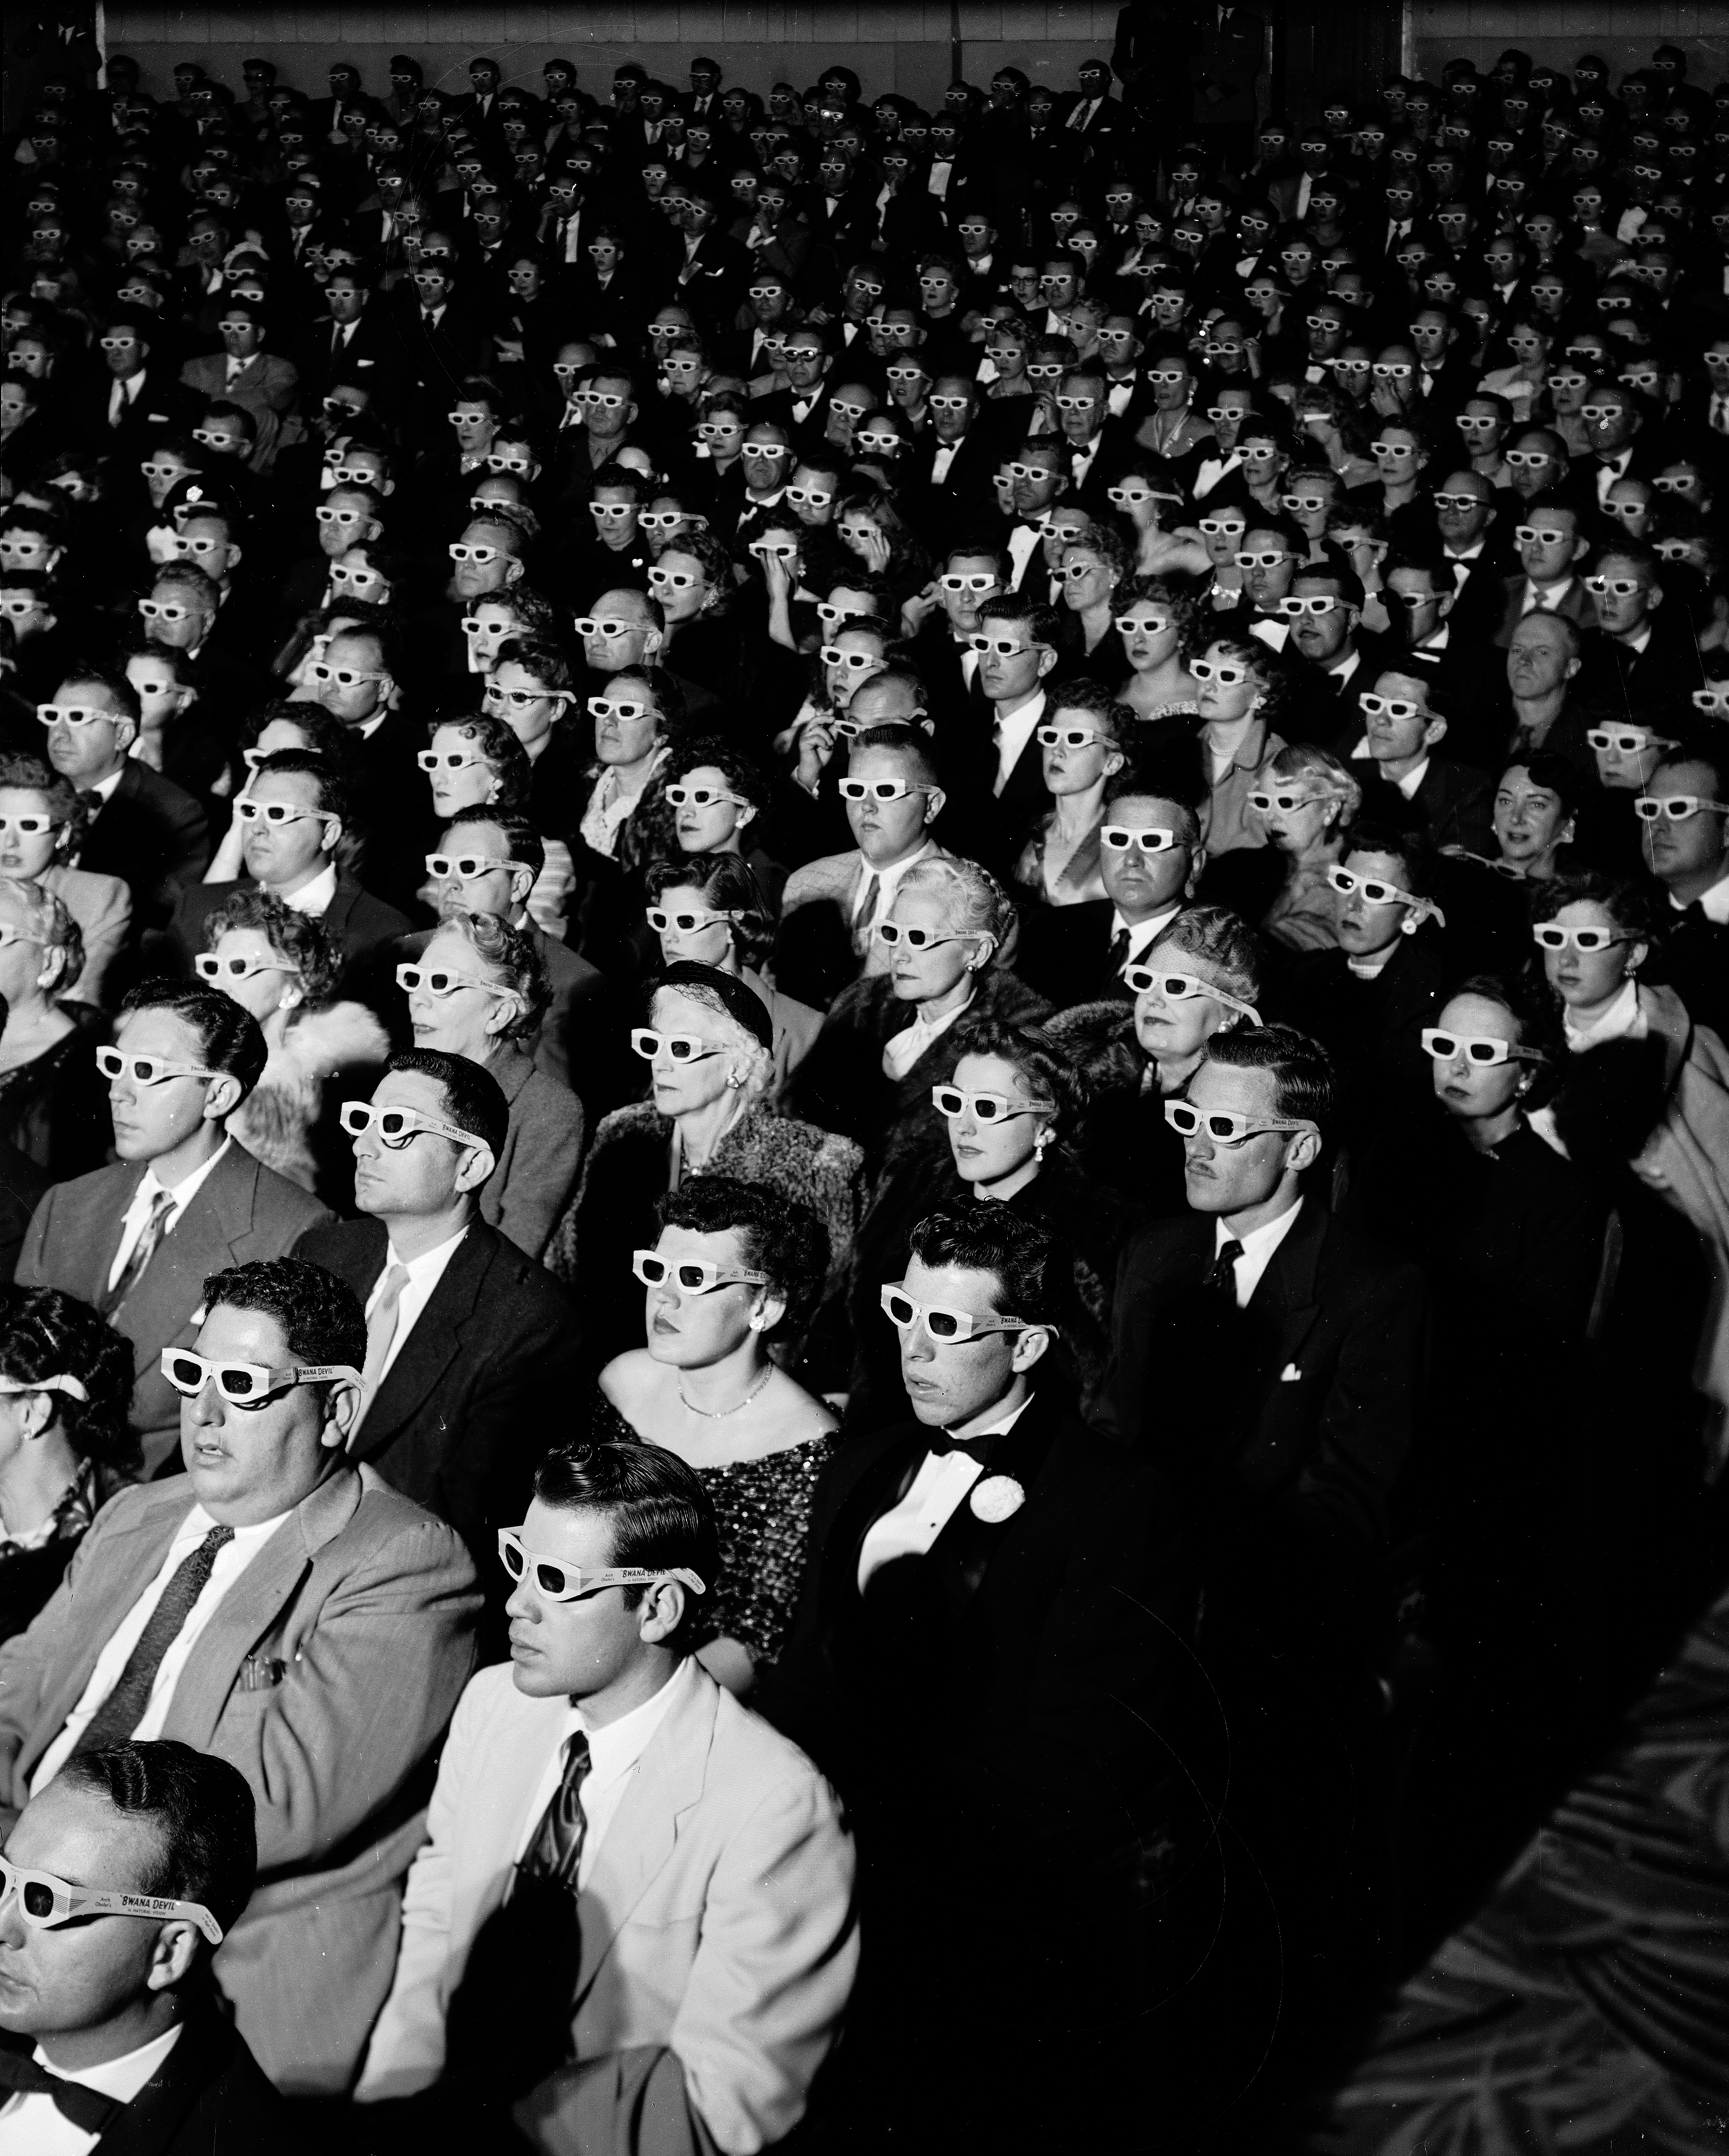 ull frame of movie audience wearing special 3D glasses to view film Bwana Devil which was shot with new natural vision 3 dimensional technology. (J. R. Eyerman&mdash;The LIFE Picture Collection/Gett)